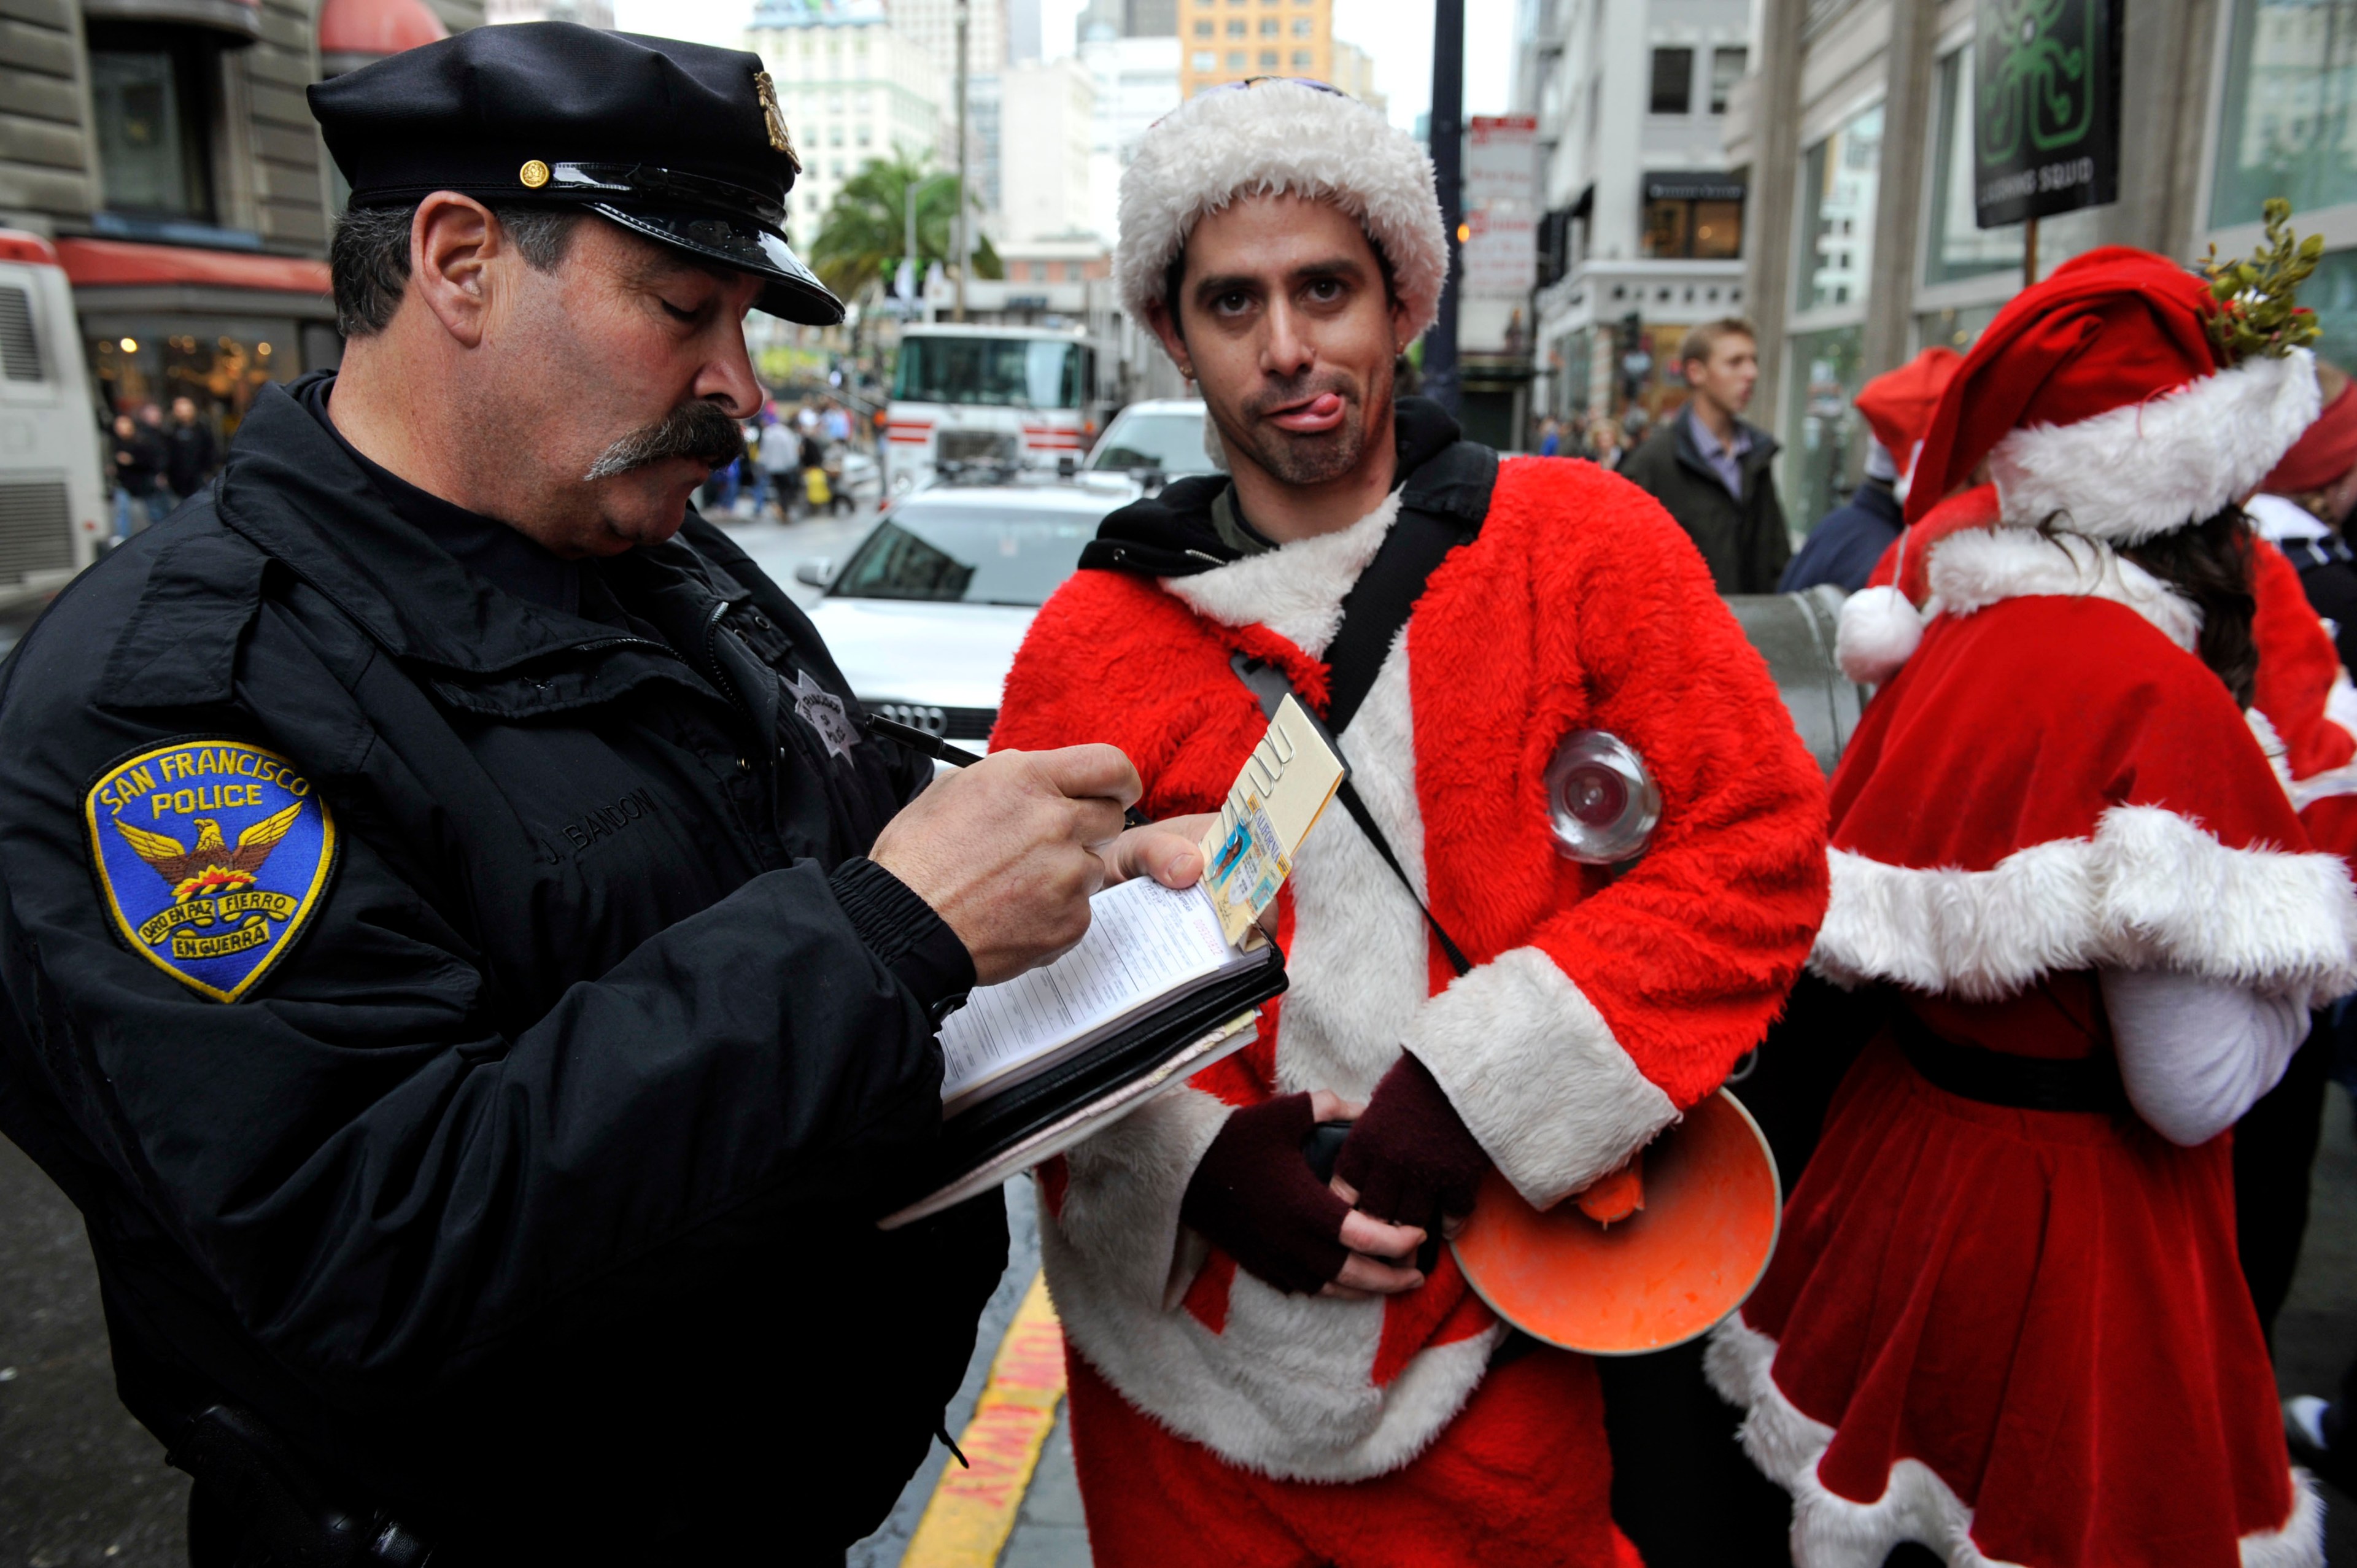 A Dec. 10, 2009 photo showing a San Francisco Police officer giving a man dressed as Santa Claus an open container ticket during the Santacon pub crawl in Downtown San Francisco. | Russel A. Daniels/AP Photo